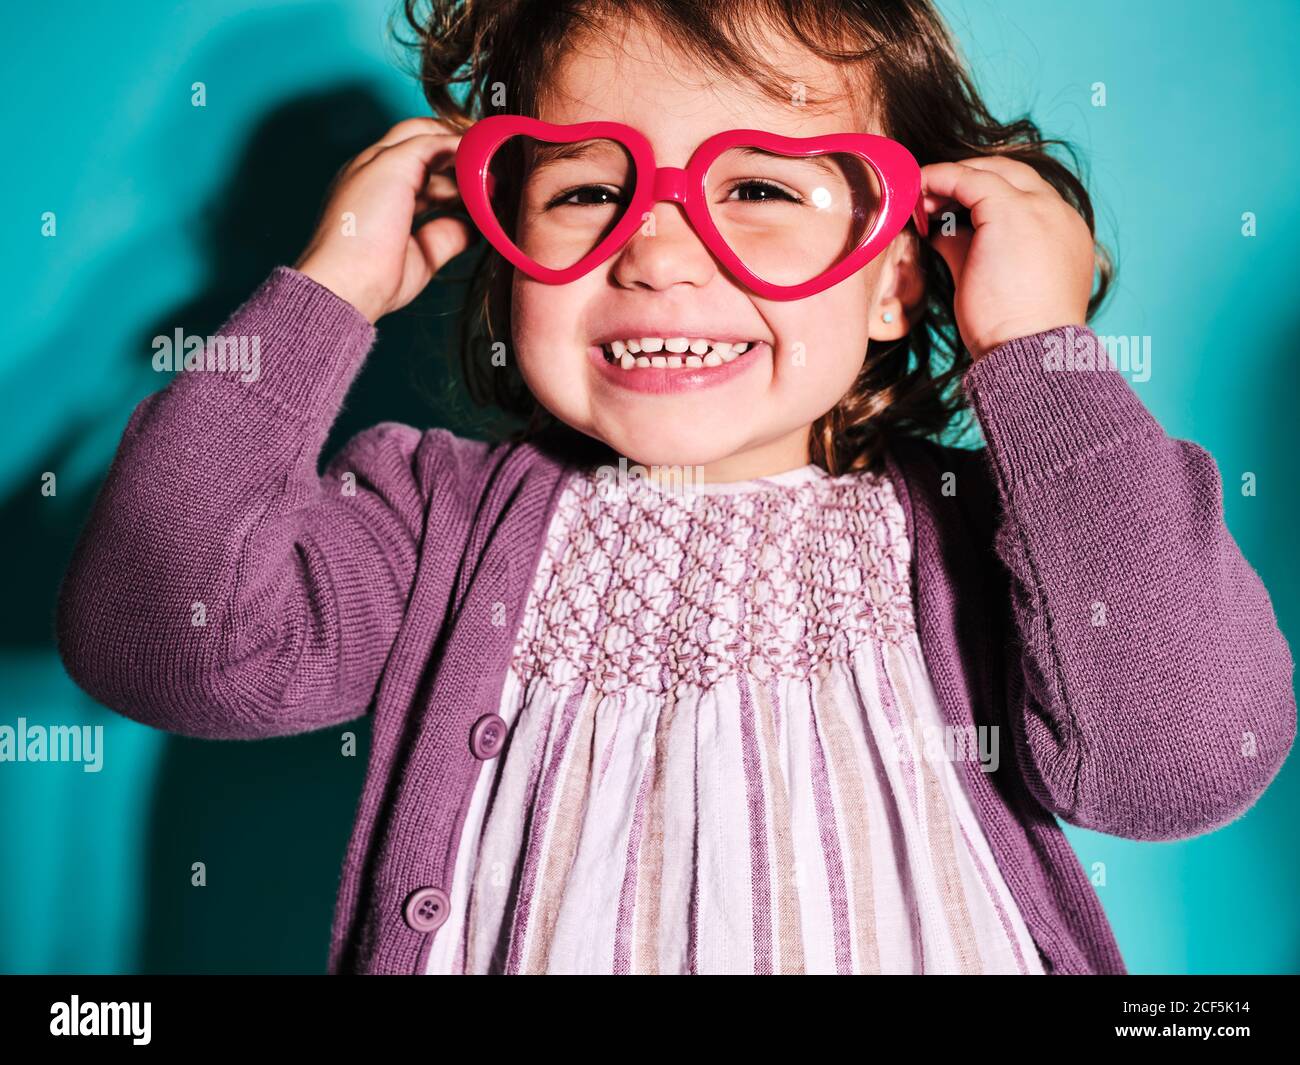 Vogue Eyewear High Resolution Stock Photography and Images - Alamy